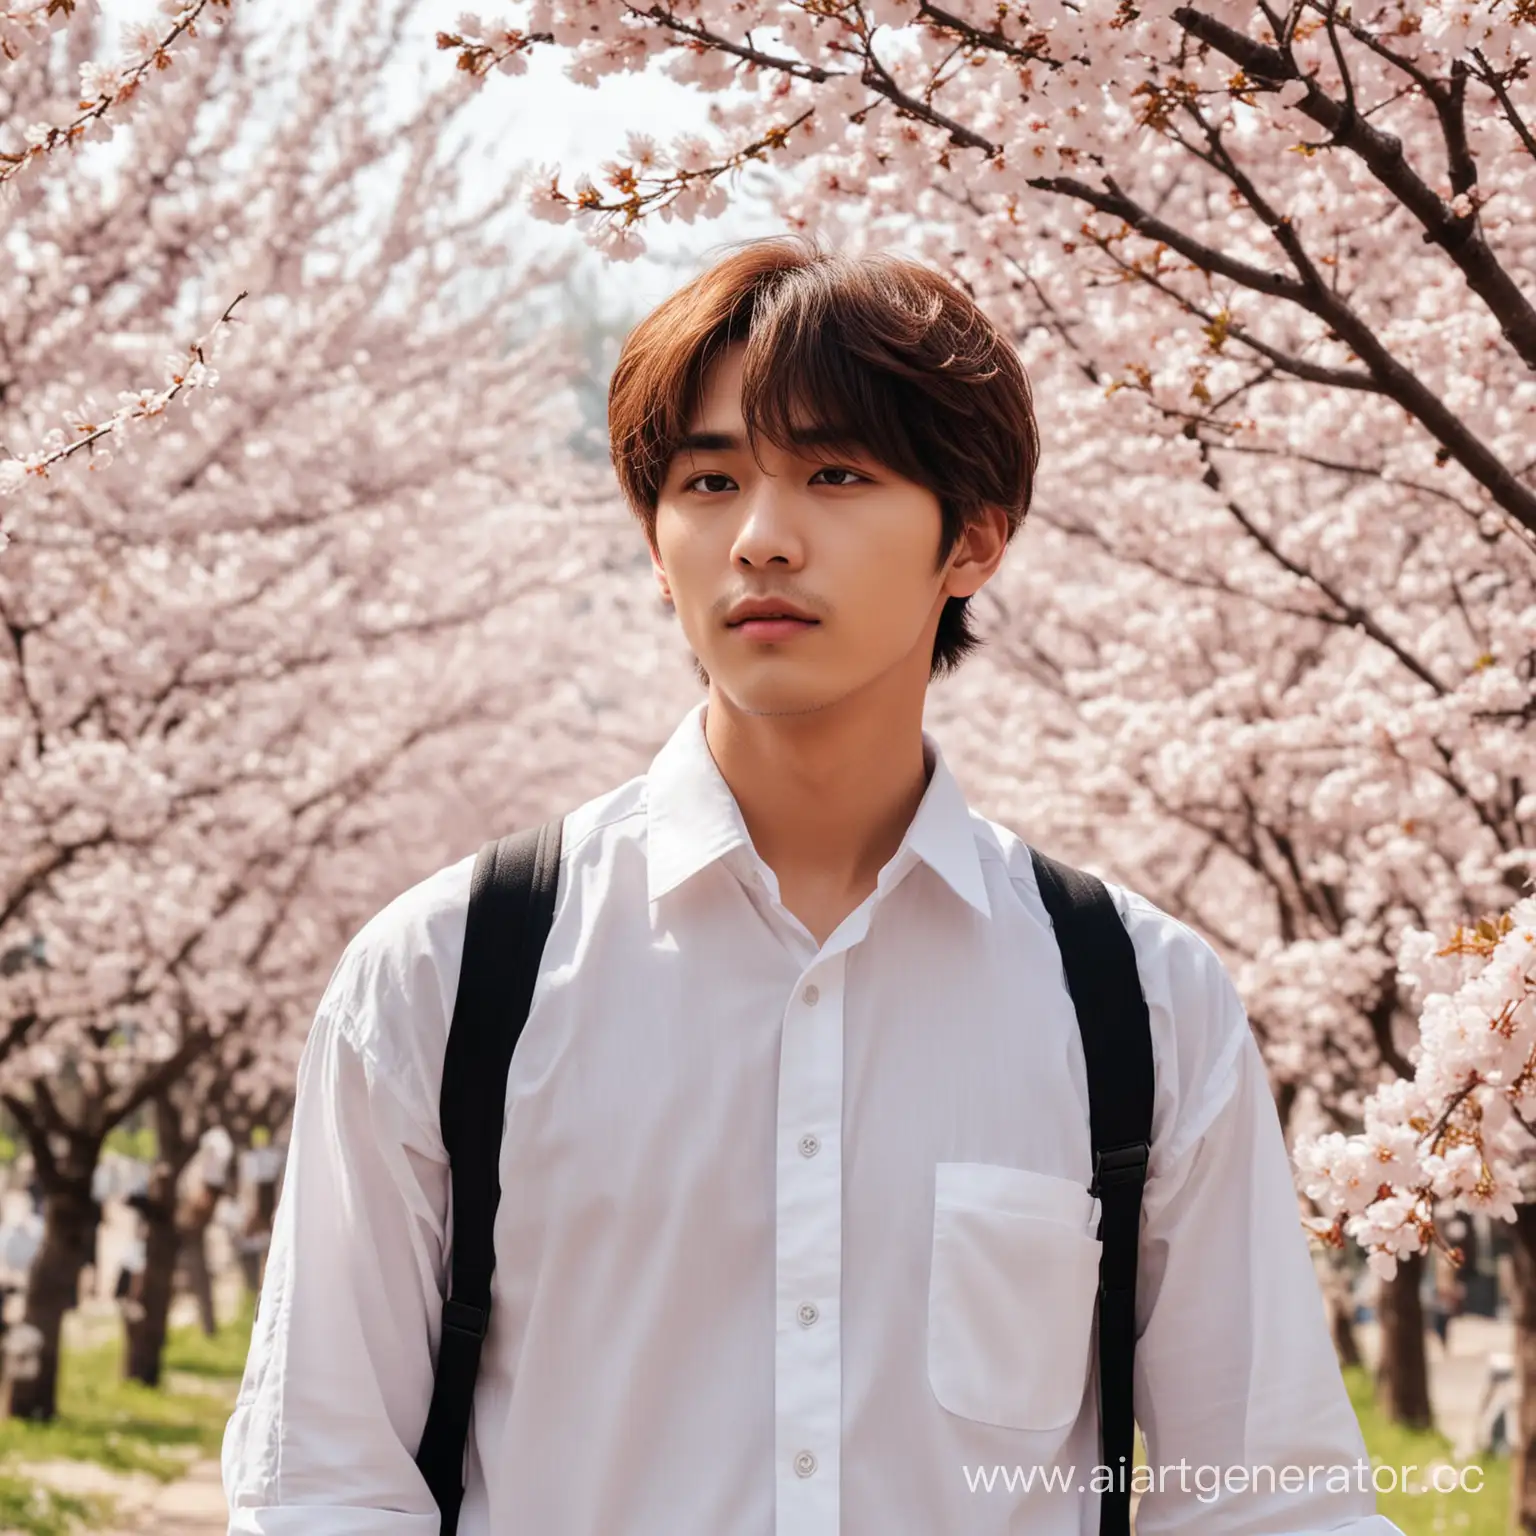 Taehyung-Lookalike-in-White-Shirt-Strolling-Amid-Cherry-Blossoms